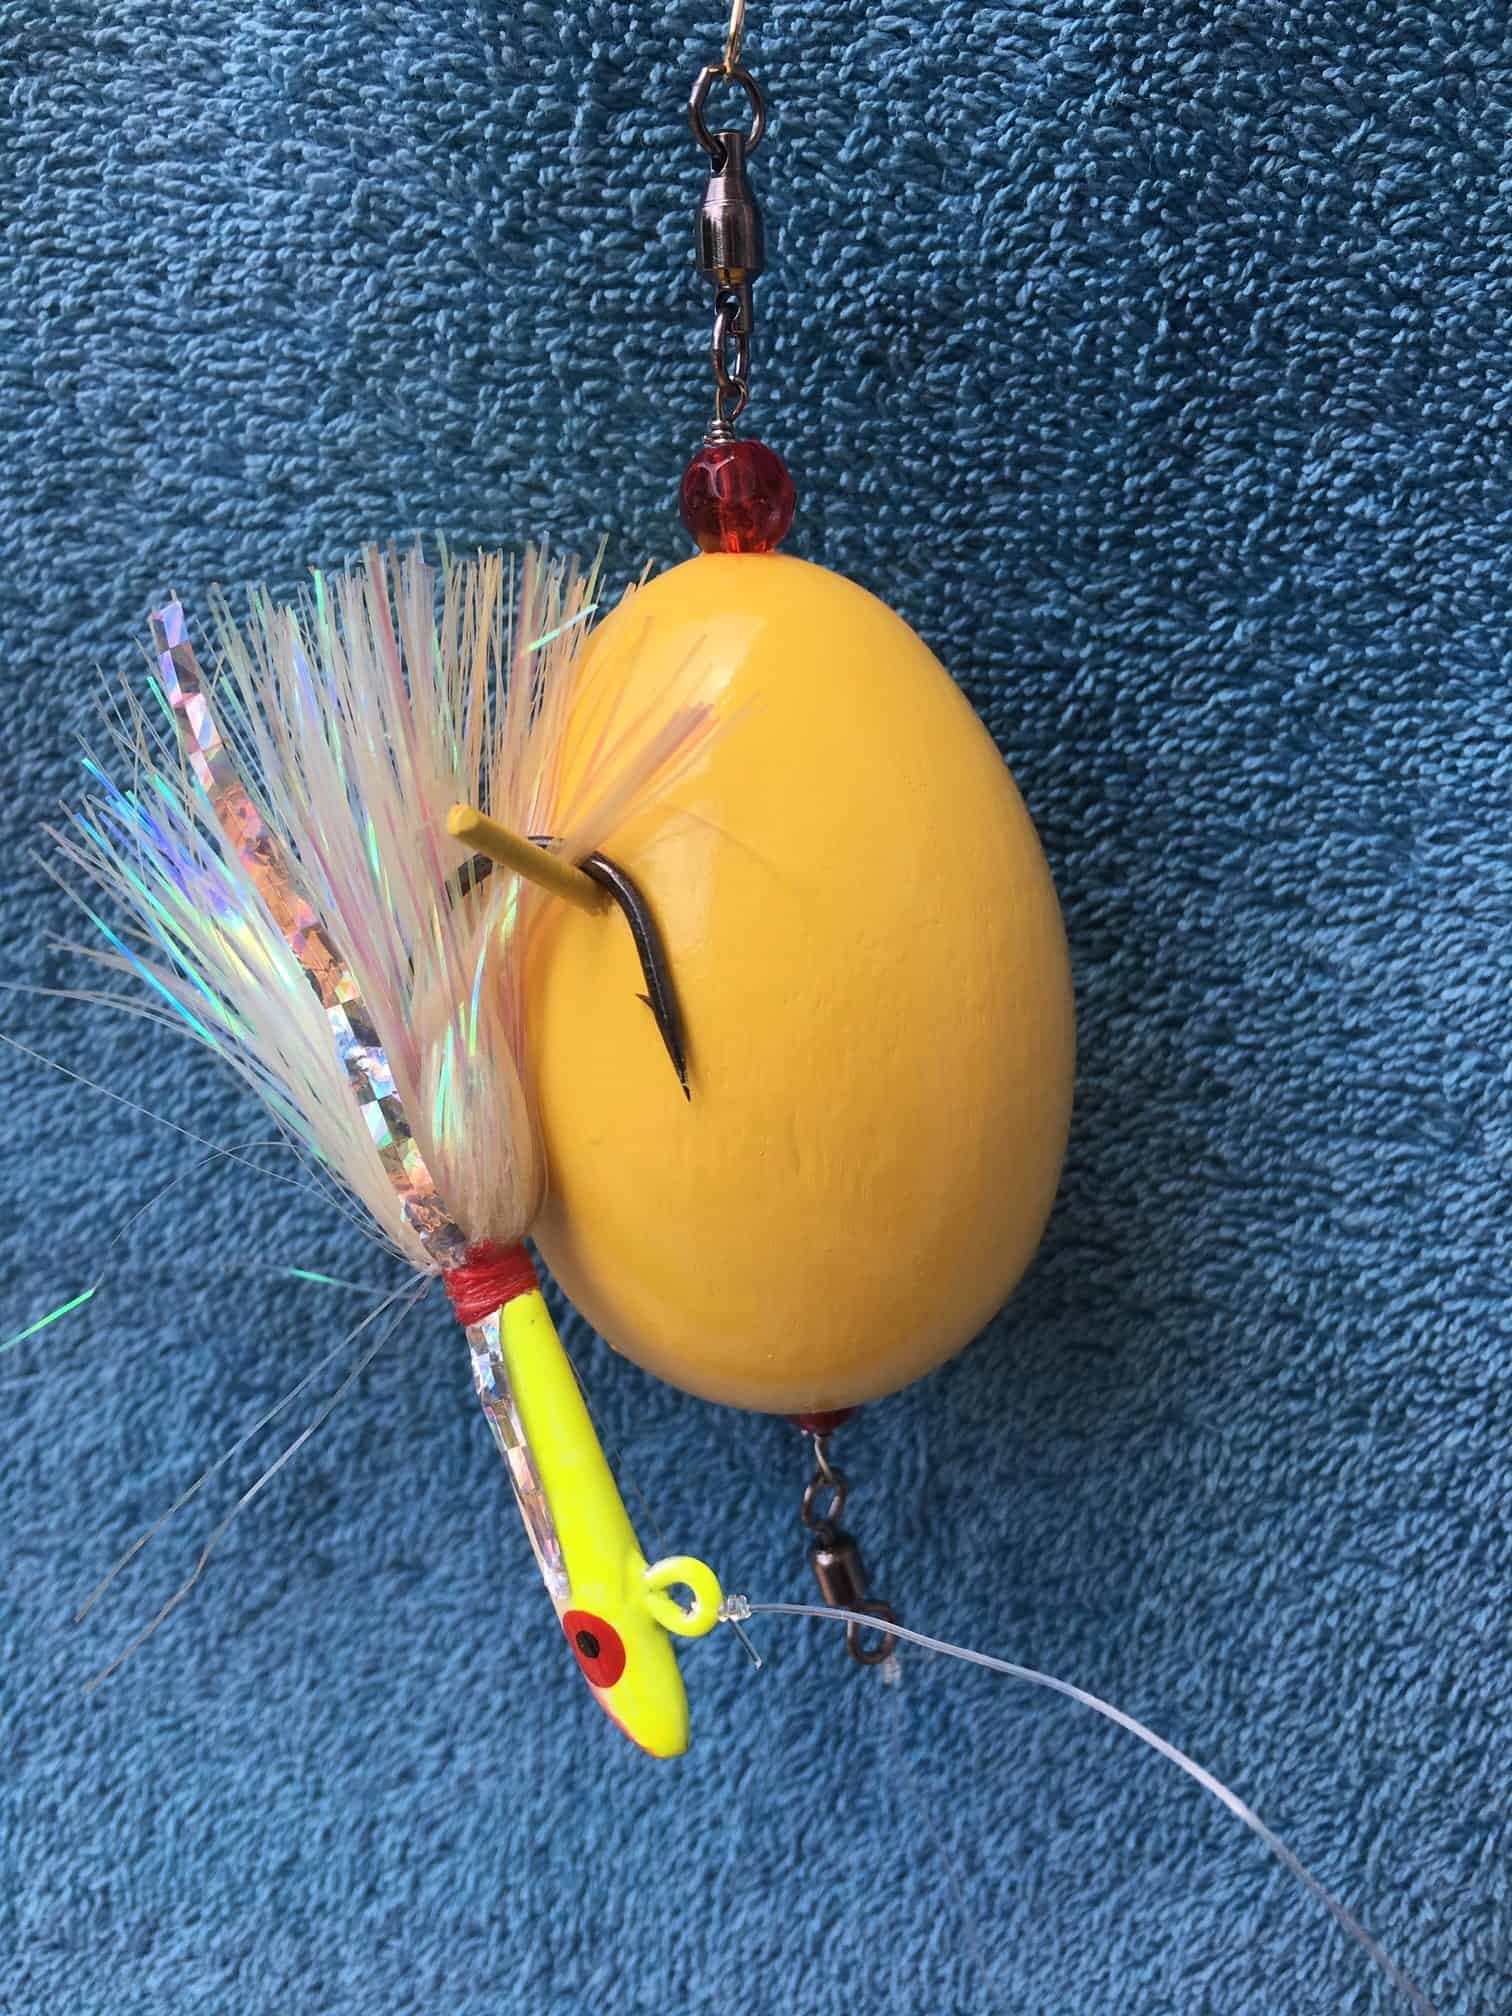 Yellow Egg Casting Egg rigged with a fly